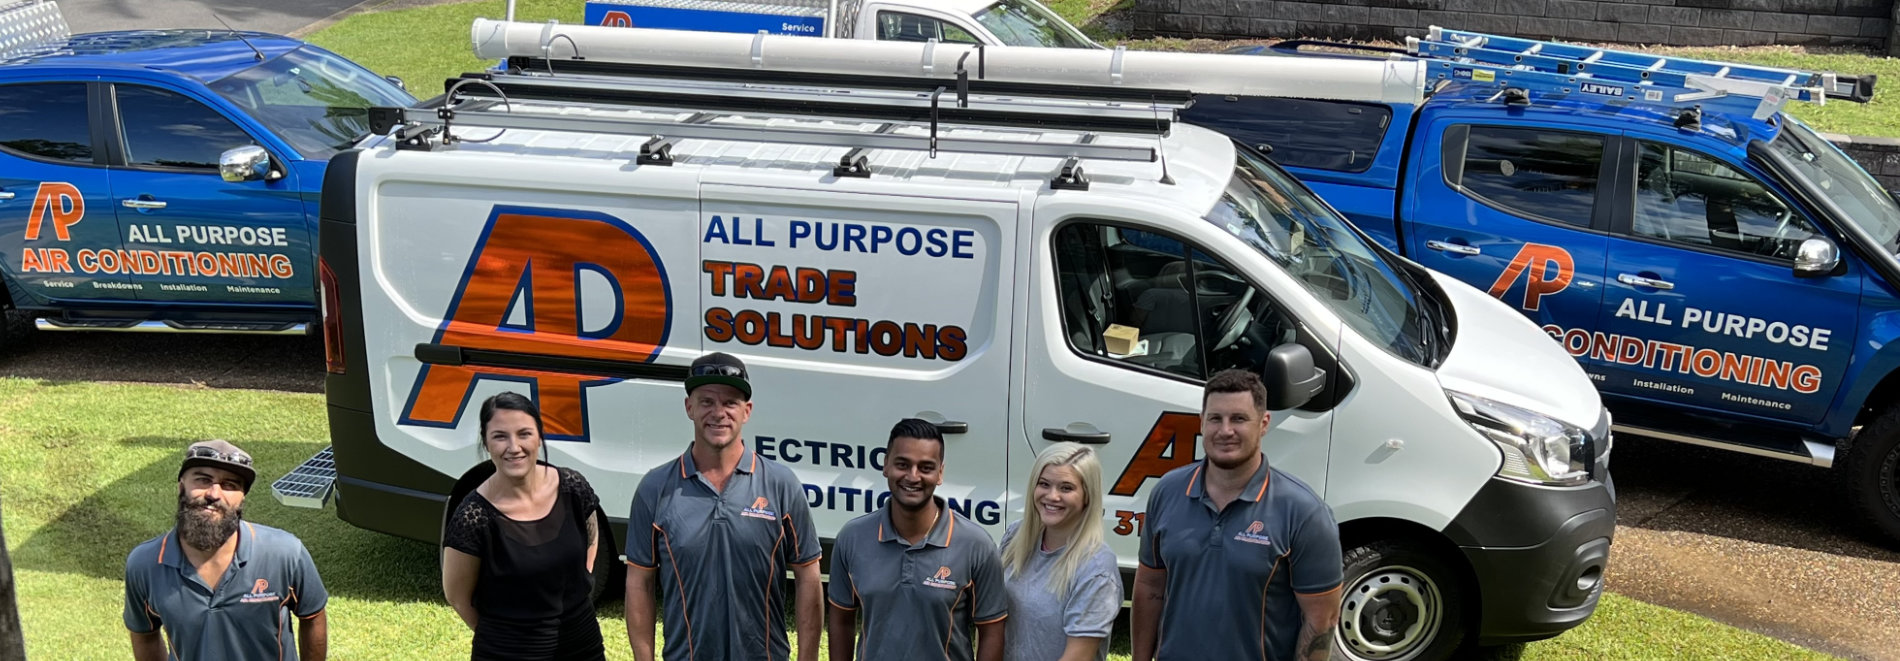 All Purpose Trade Solutions Team standing with branded utes